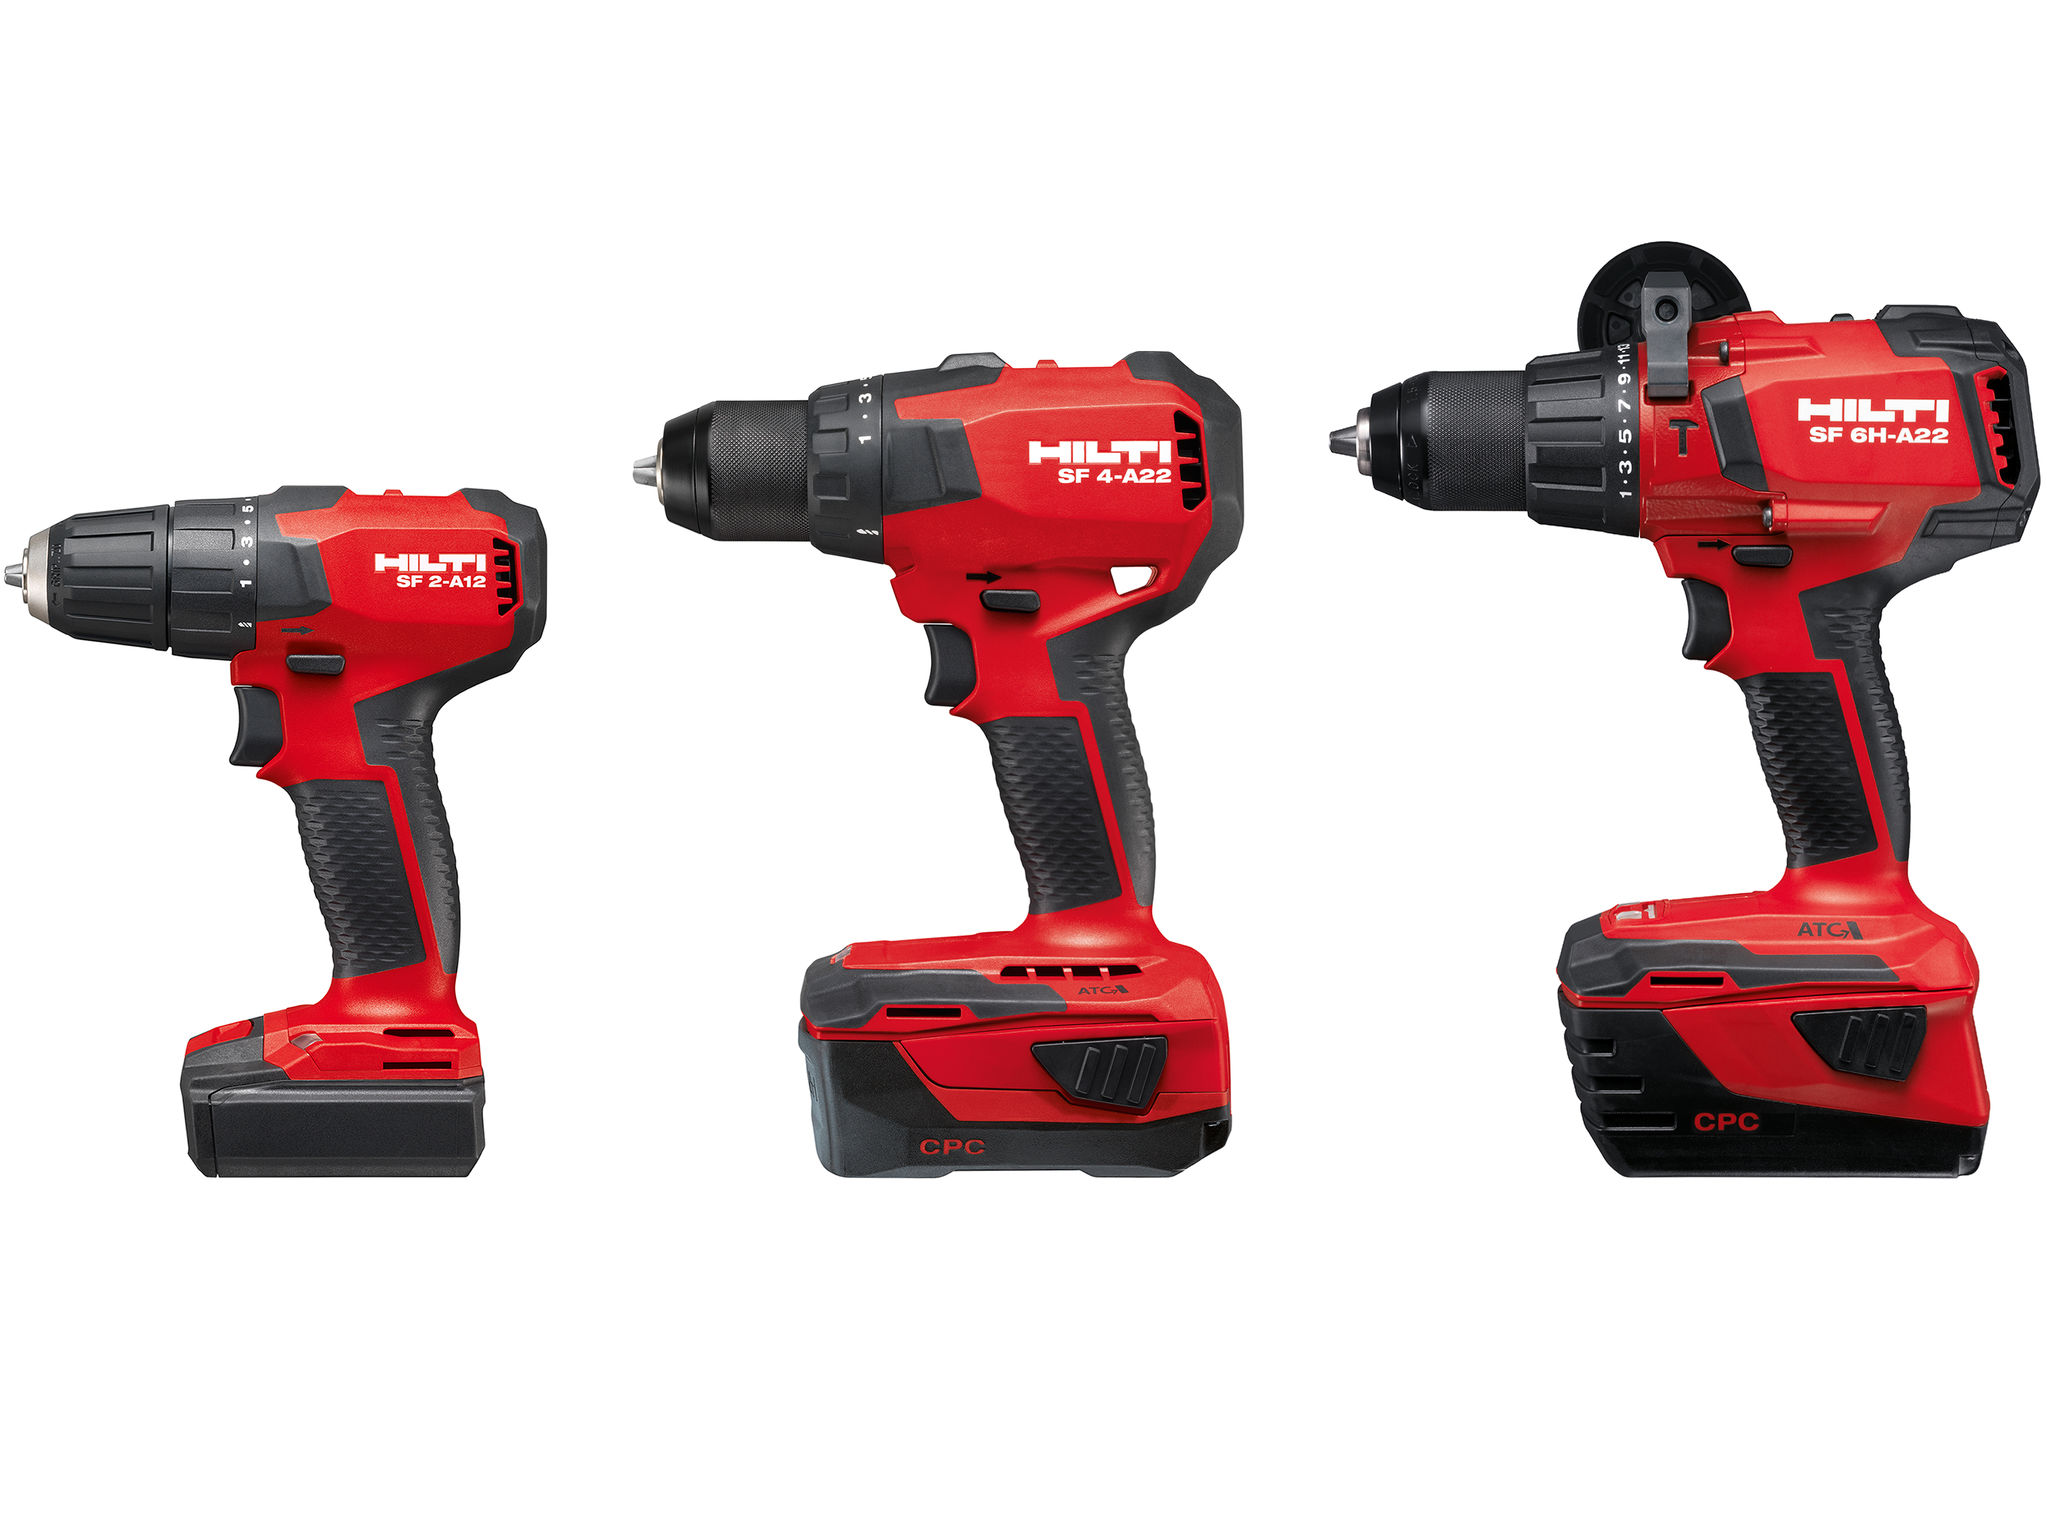 Hilti 03482660 SFH 18-A and SID 18-A CPC 18-volt Cordless Impact Driver and Hammer Drill Driver Combo with Soft Case - 2